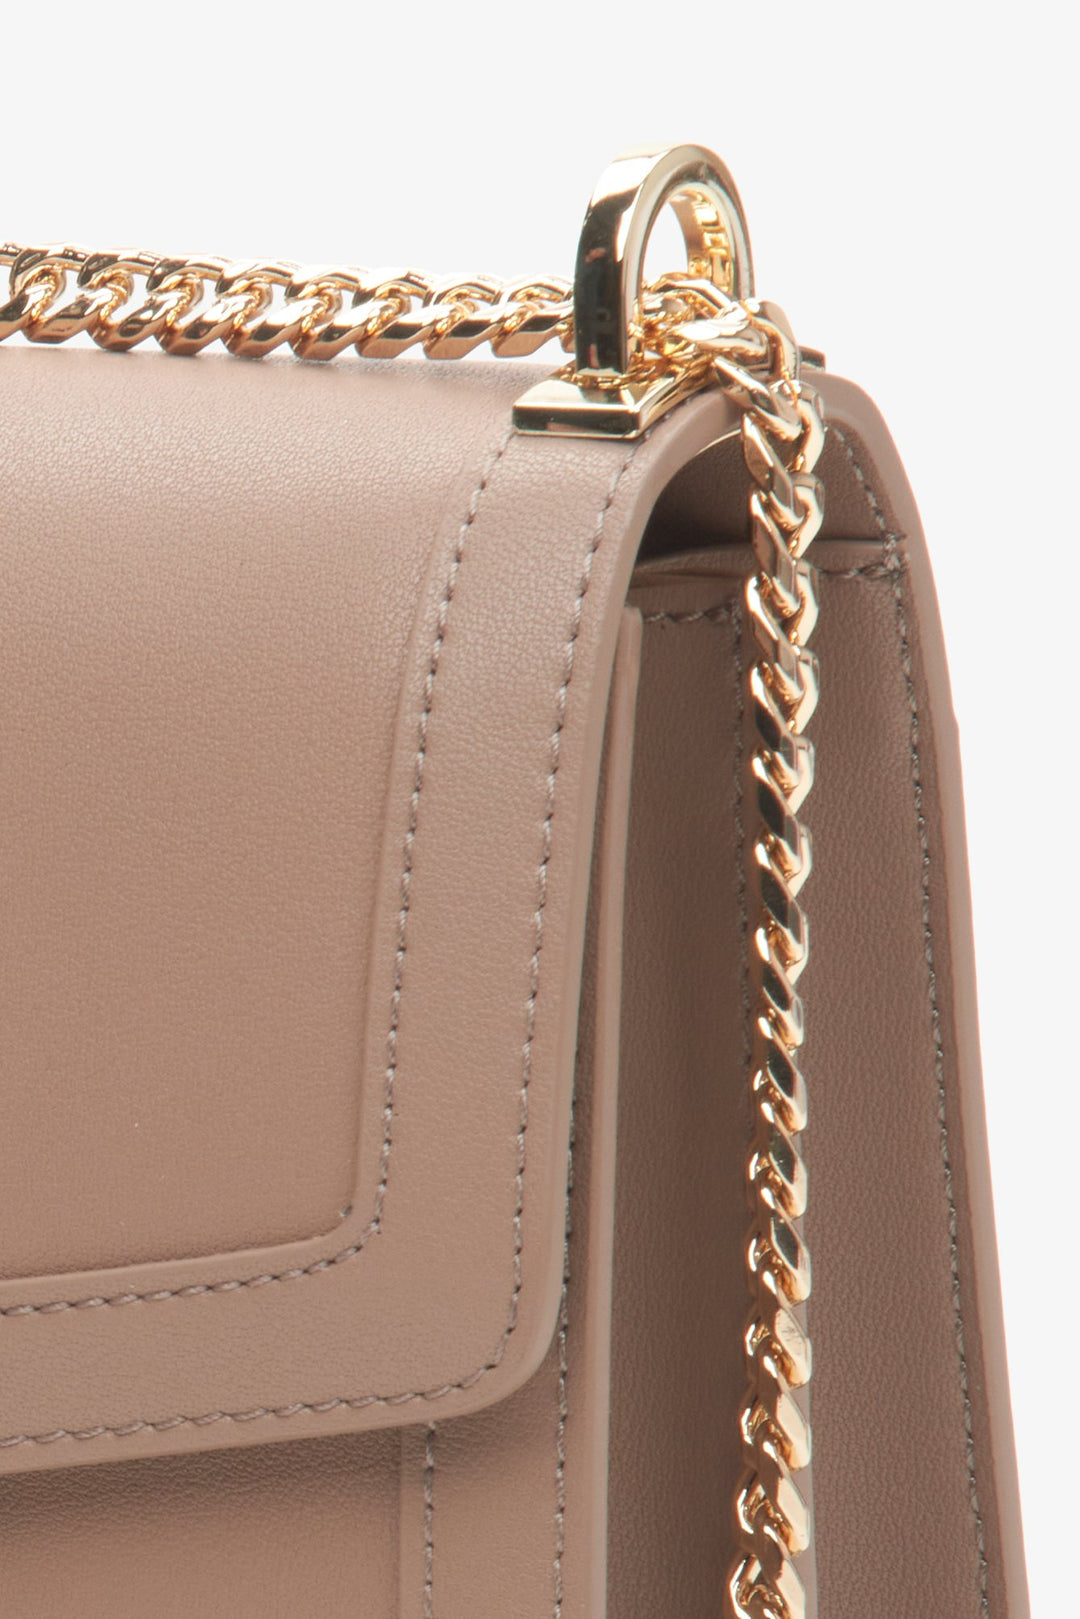 Women's leather brown handbag with a golden chain - close up on details.